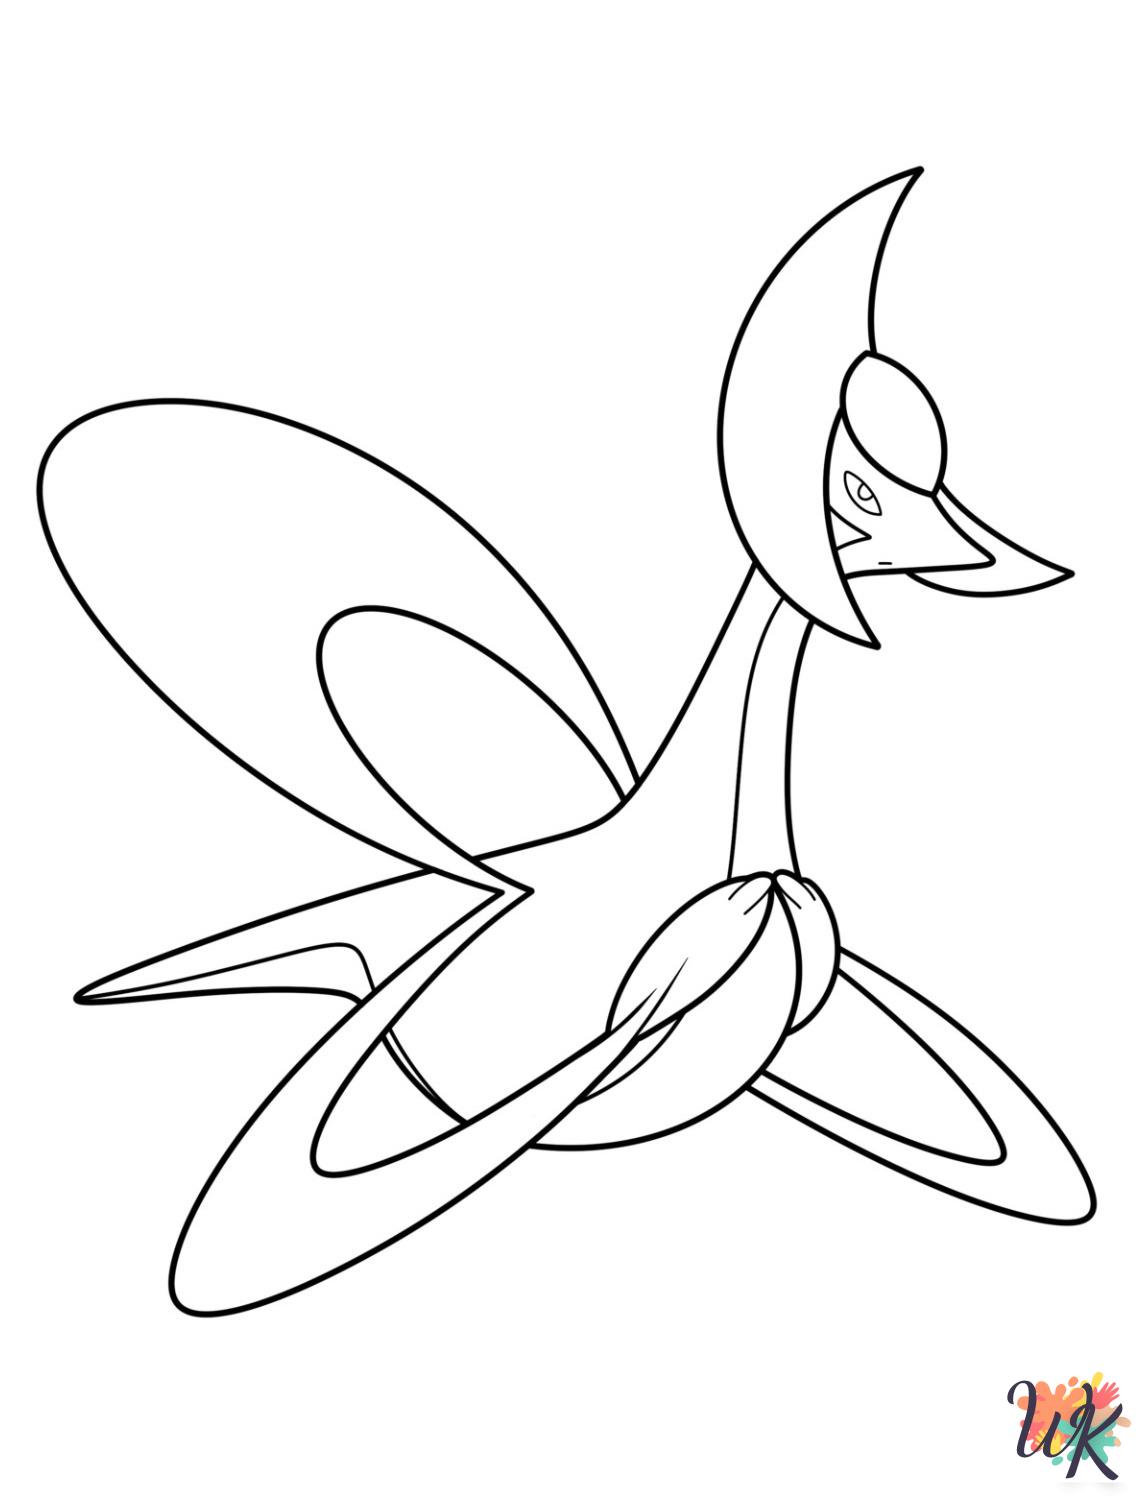 free Legendary Pokemon coloring pages for adults